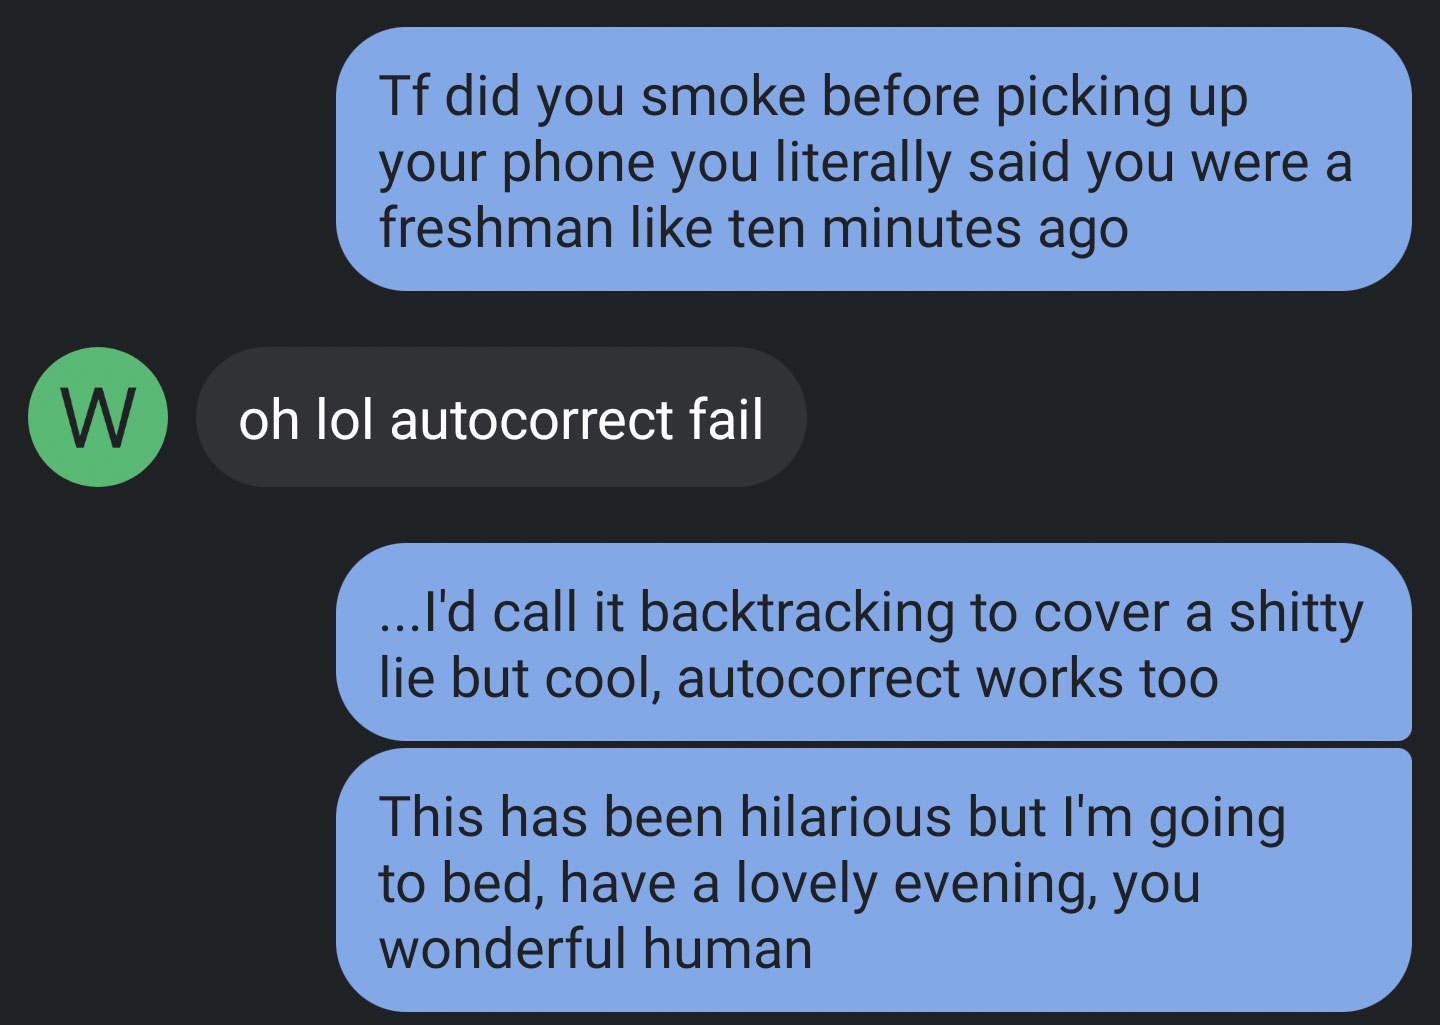 presentation - Tf did you smoke before picking up your phone you literally said you were a freshman ten minutes ago W oh lol autocorrect fail ... I'd call it backtracking to cover a shitty lie but cool, autocorrect works too This has been hilarious but I'